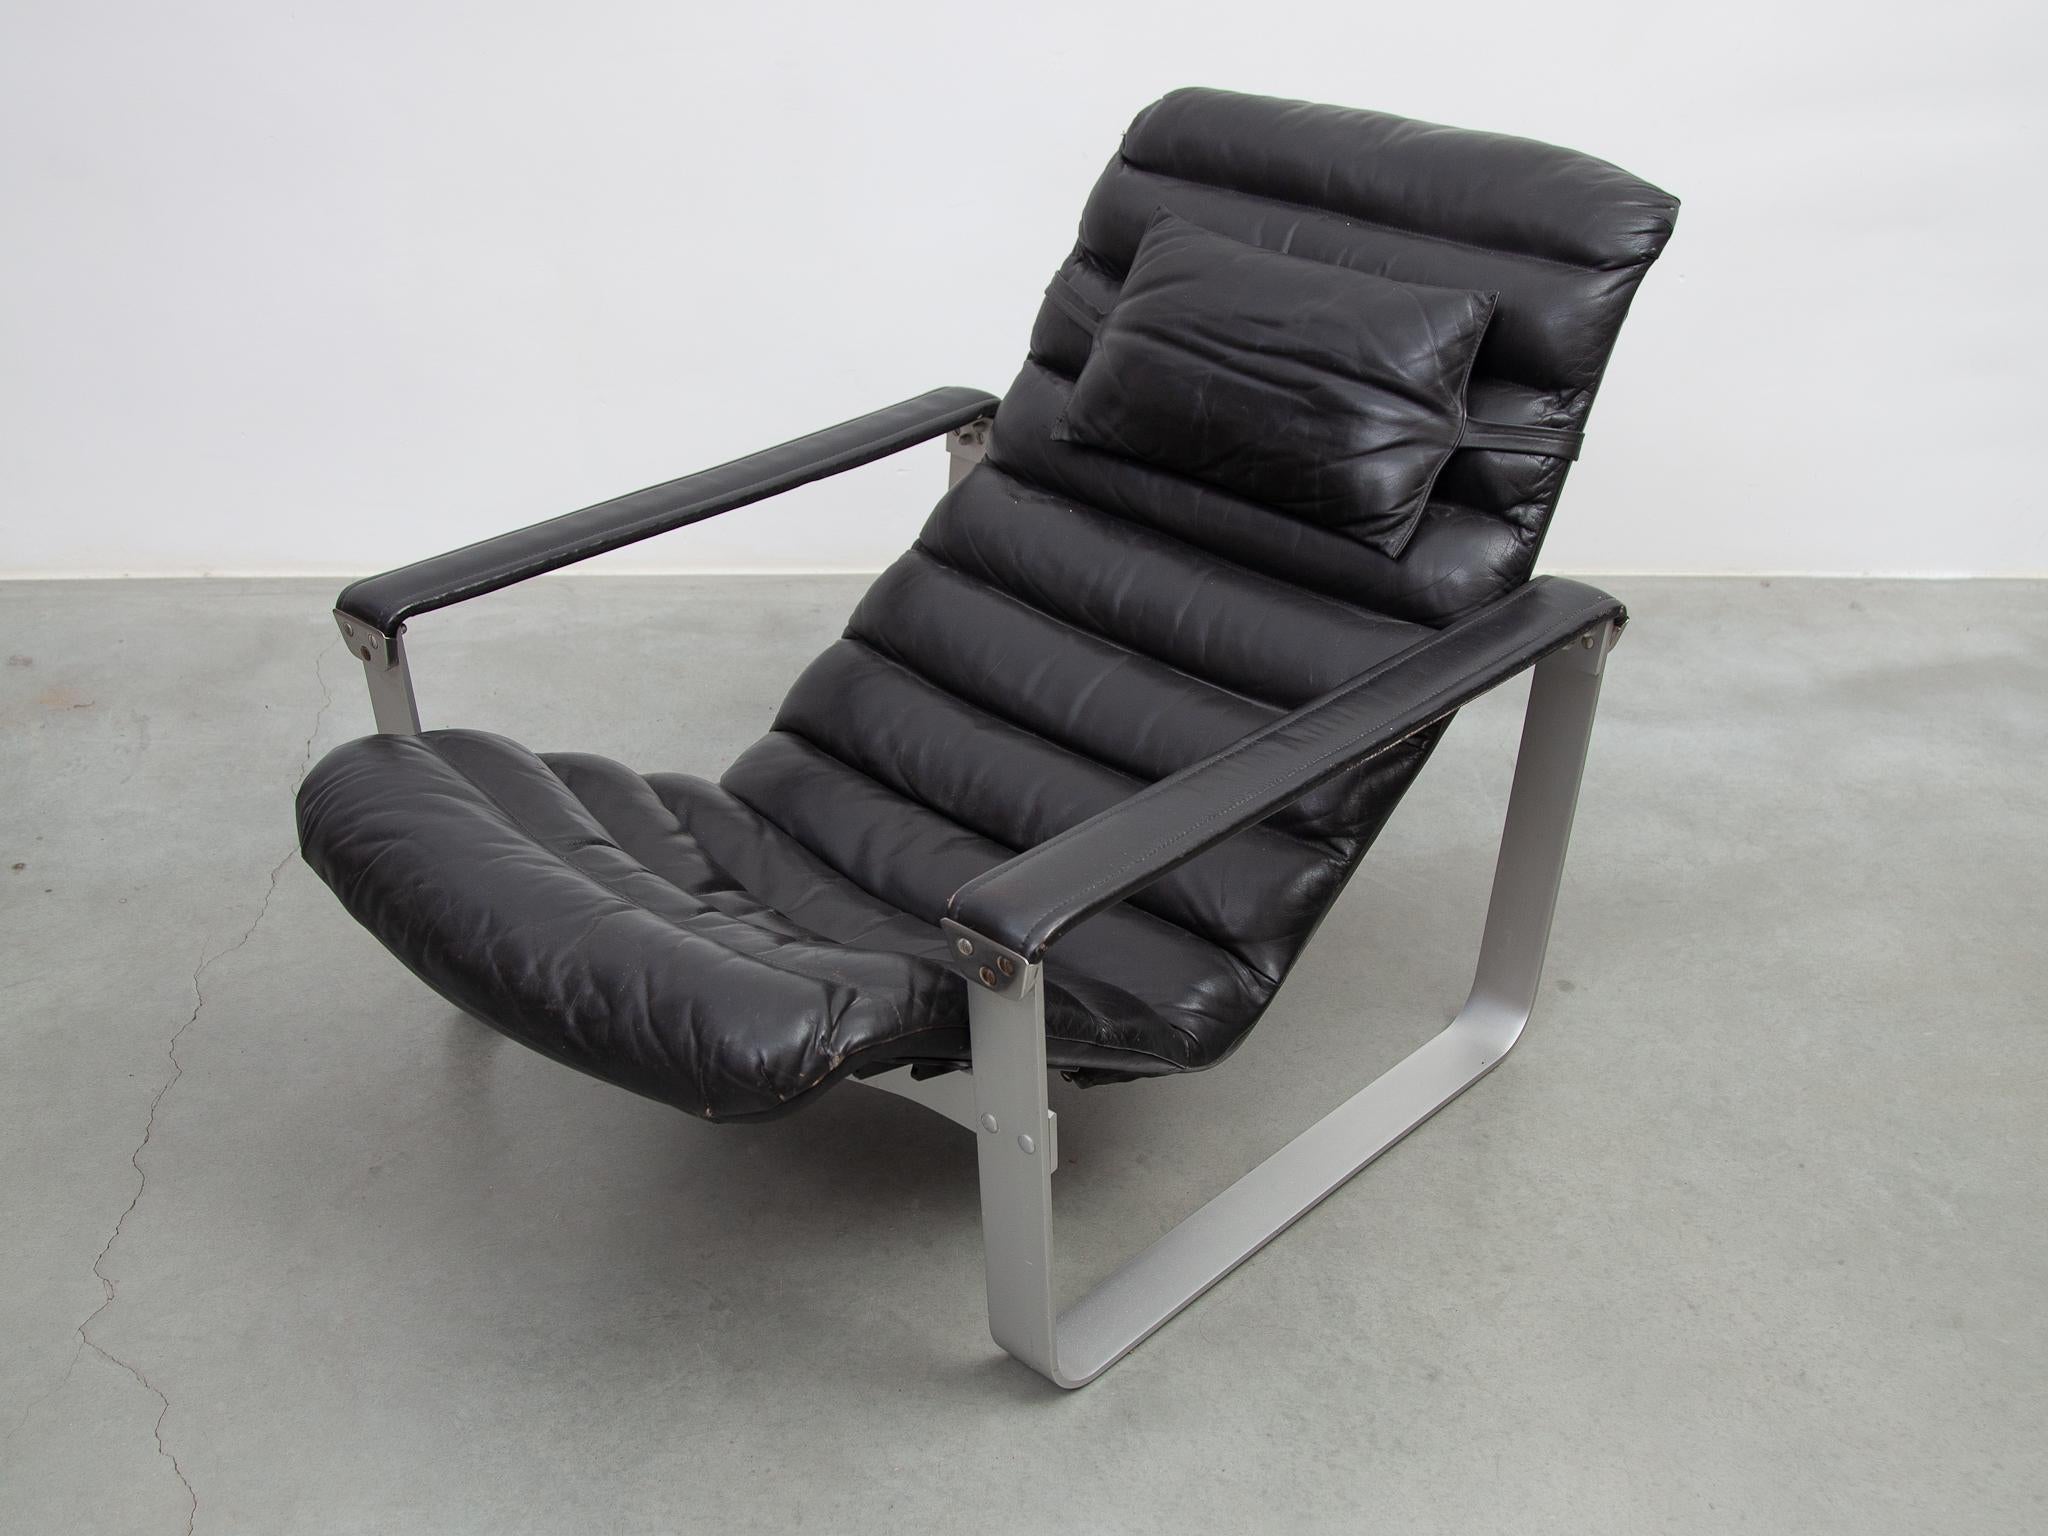 Pulkka Lounge Chair designed by Ilmari Lappalainen by ASKO, Finland, 1968 For Sale 3